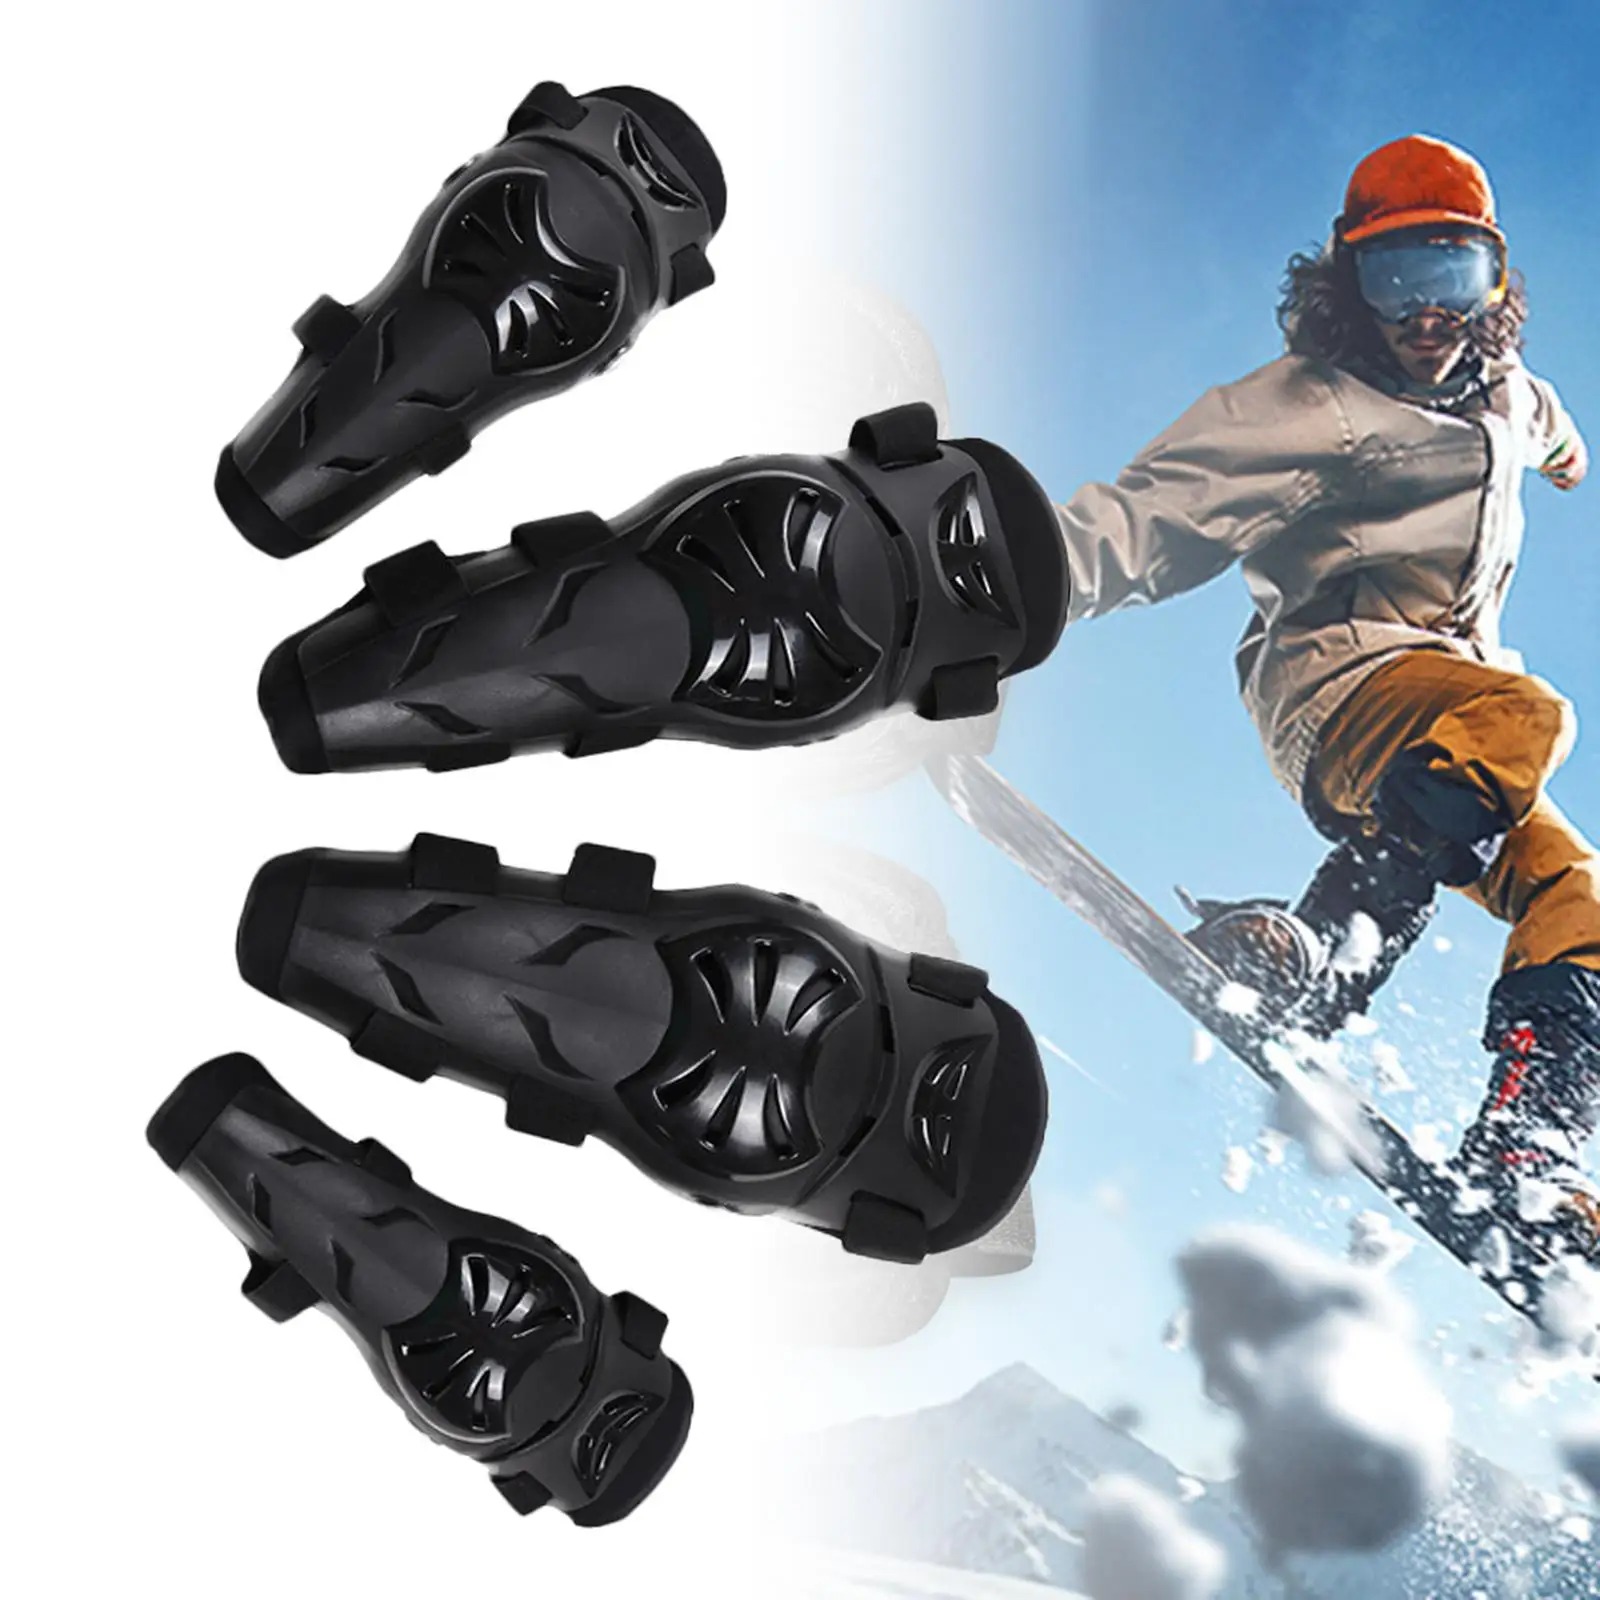 4 Pieces Motorcycle Knee Shin Guards Anti Slip Flexible Elbow Knee Pads for Skating Cycling Skateboard Skiing Powersports